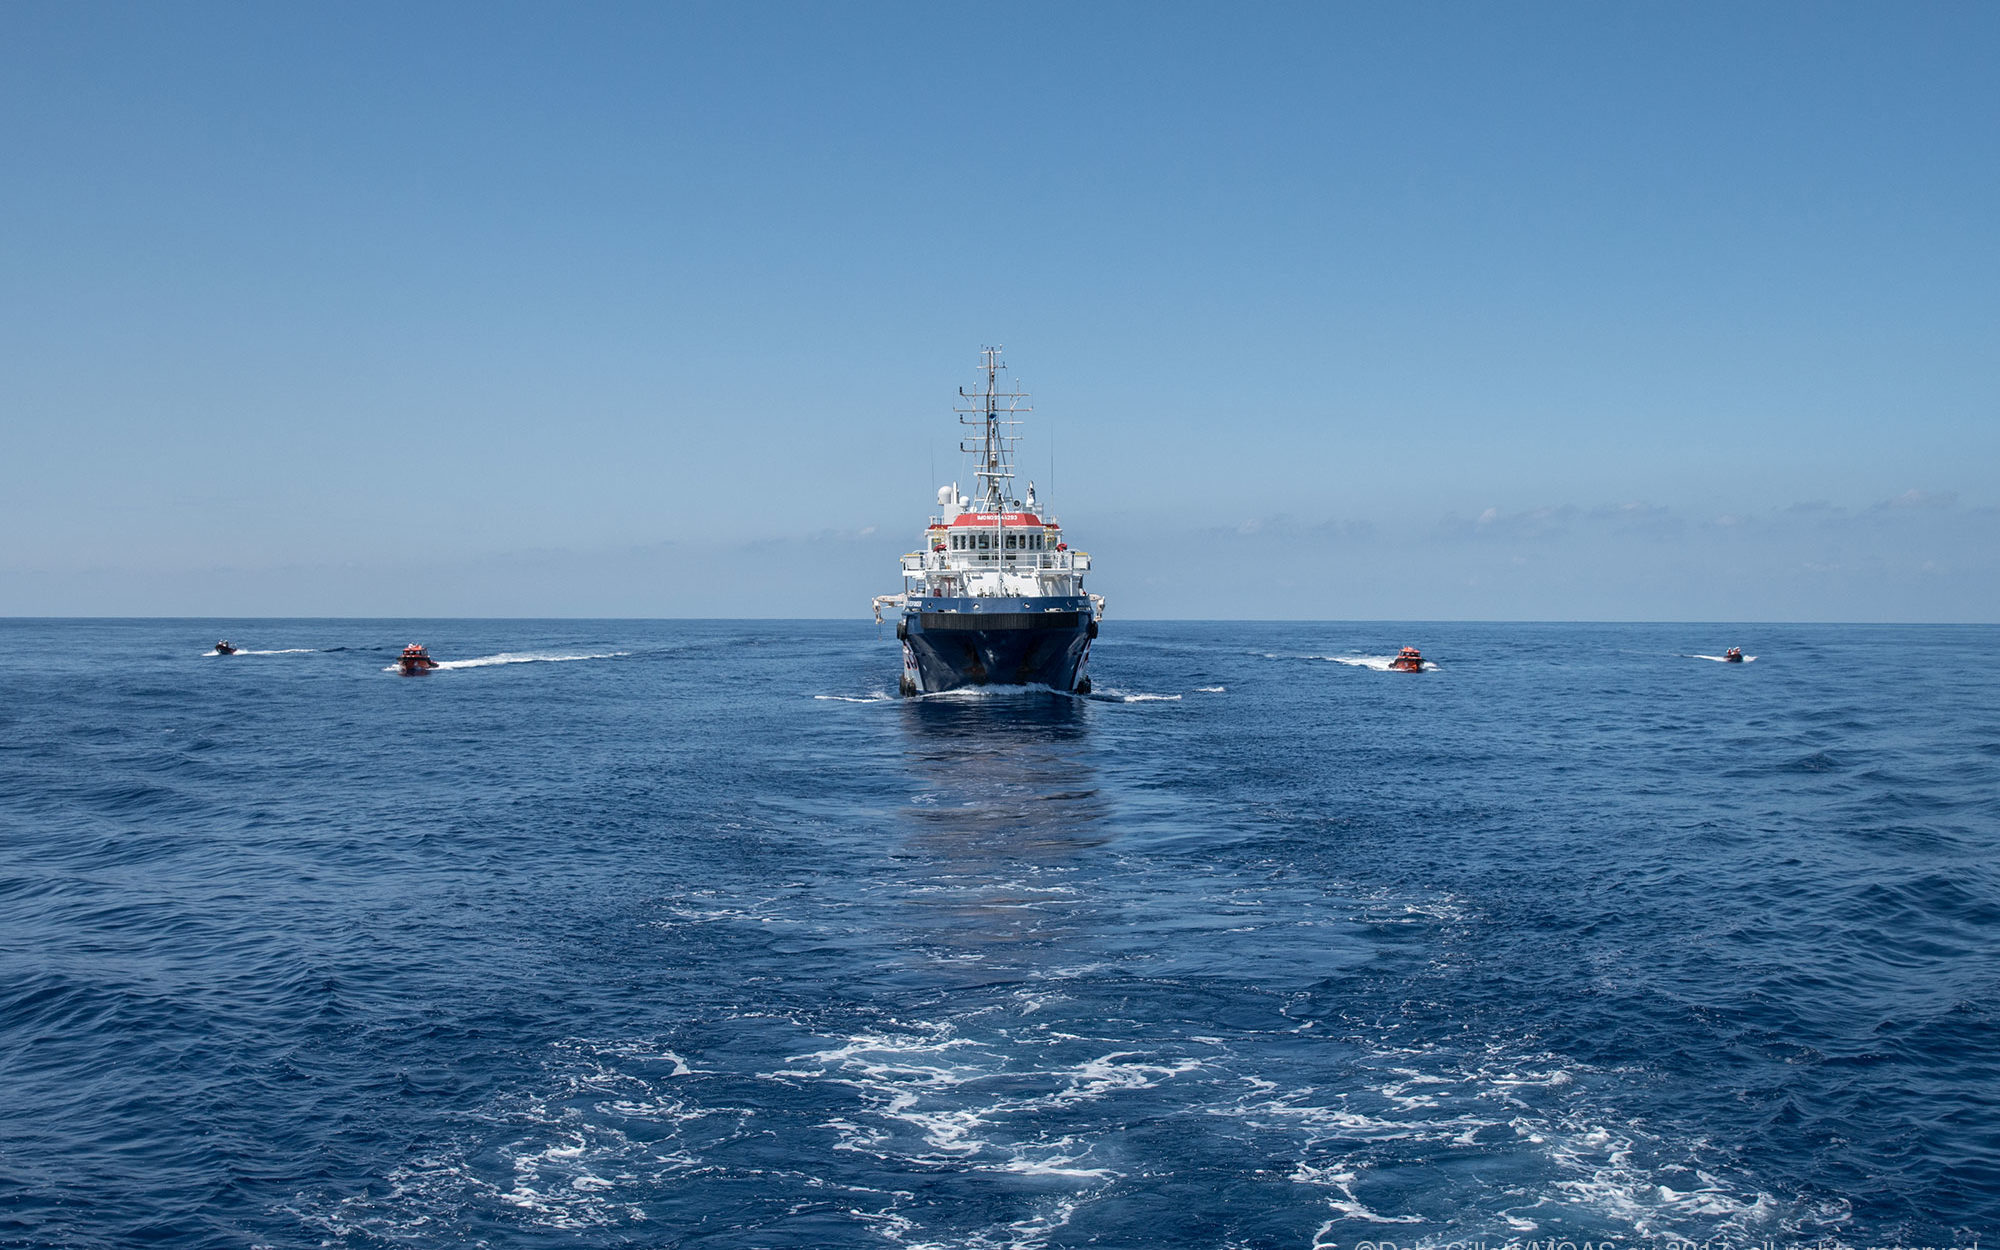 The rescue vessel belonging to Malta-based Migrant Offshore Aid Station (MOAS) crosses the Mediterranean